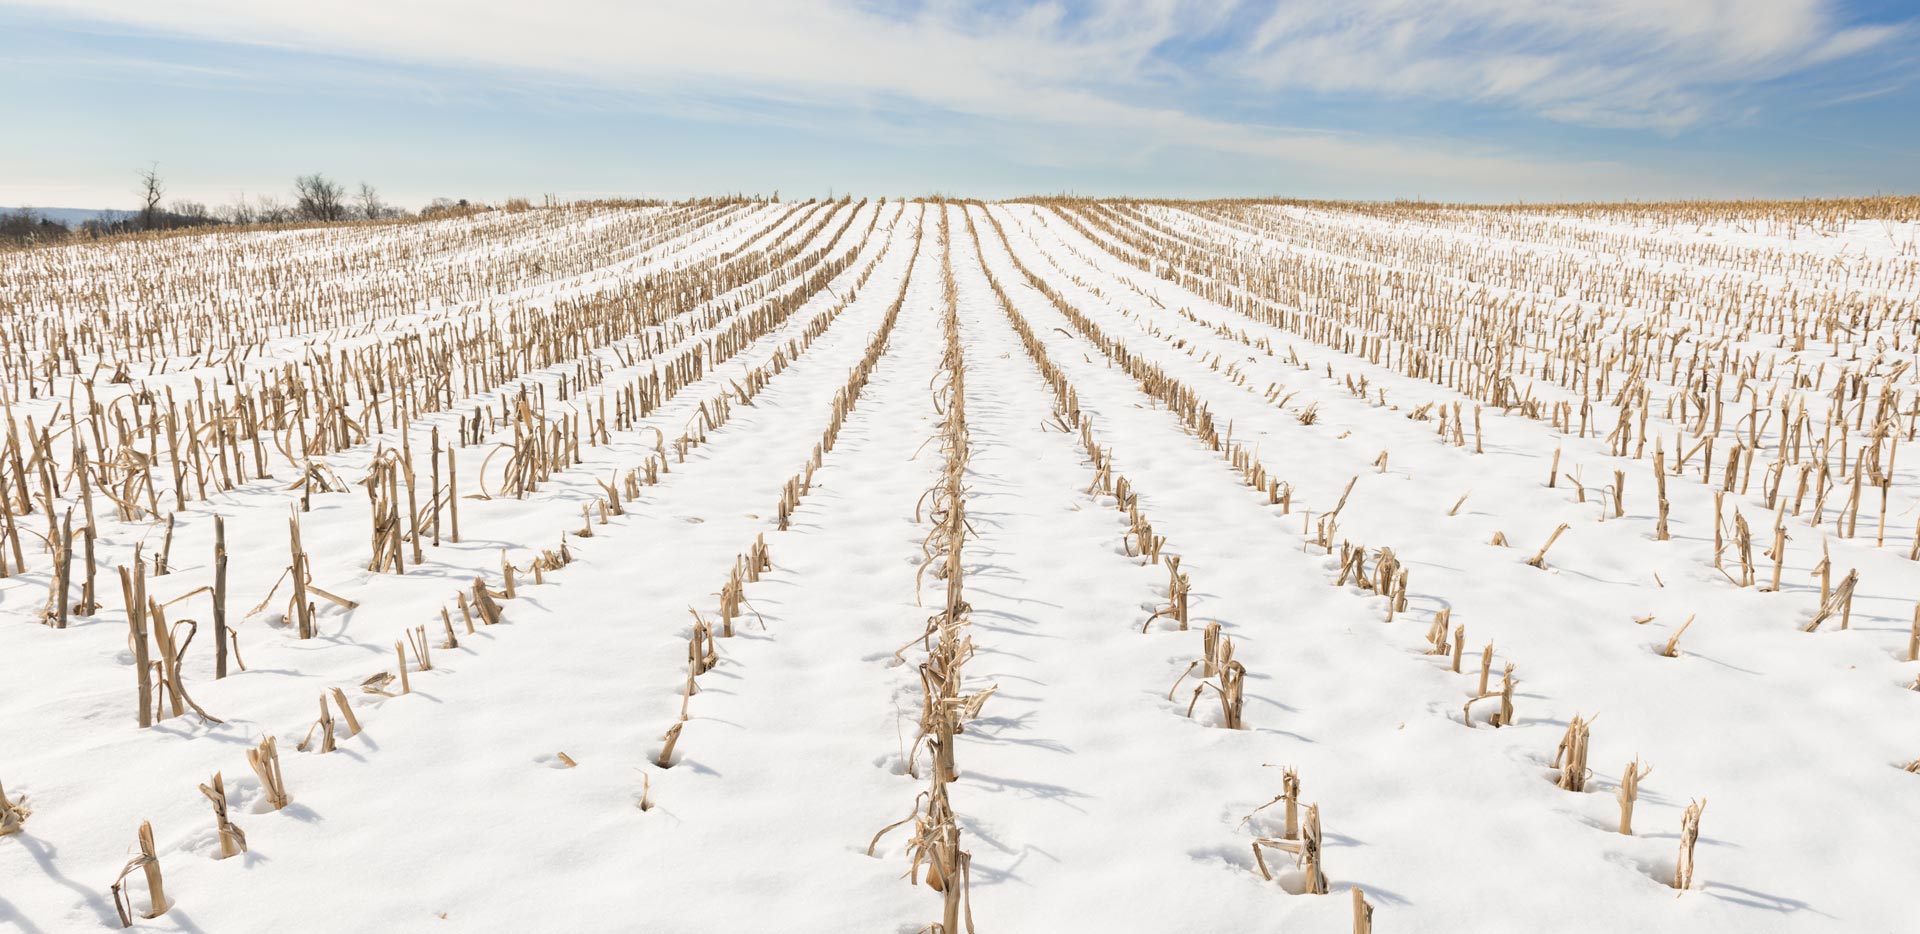 Weller Insurance Prevent Plant Coverage crops covered in snow